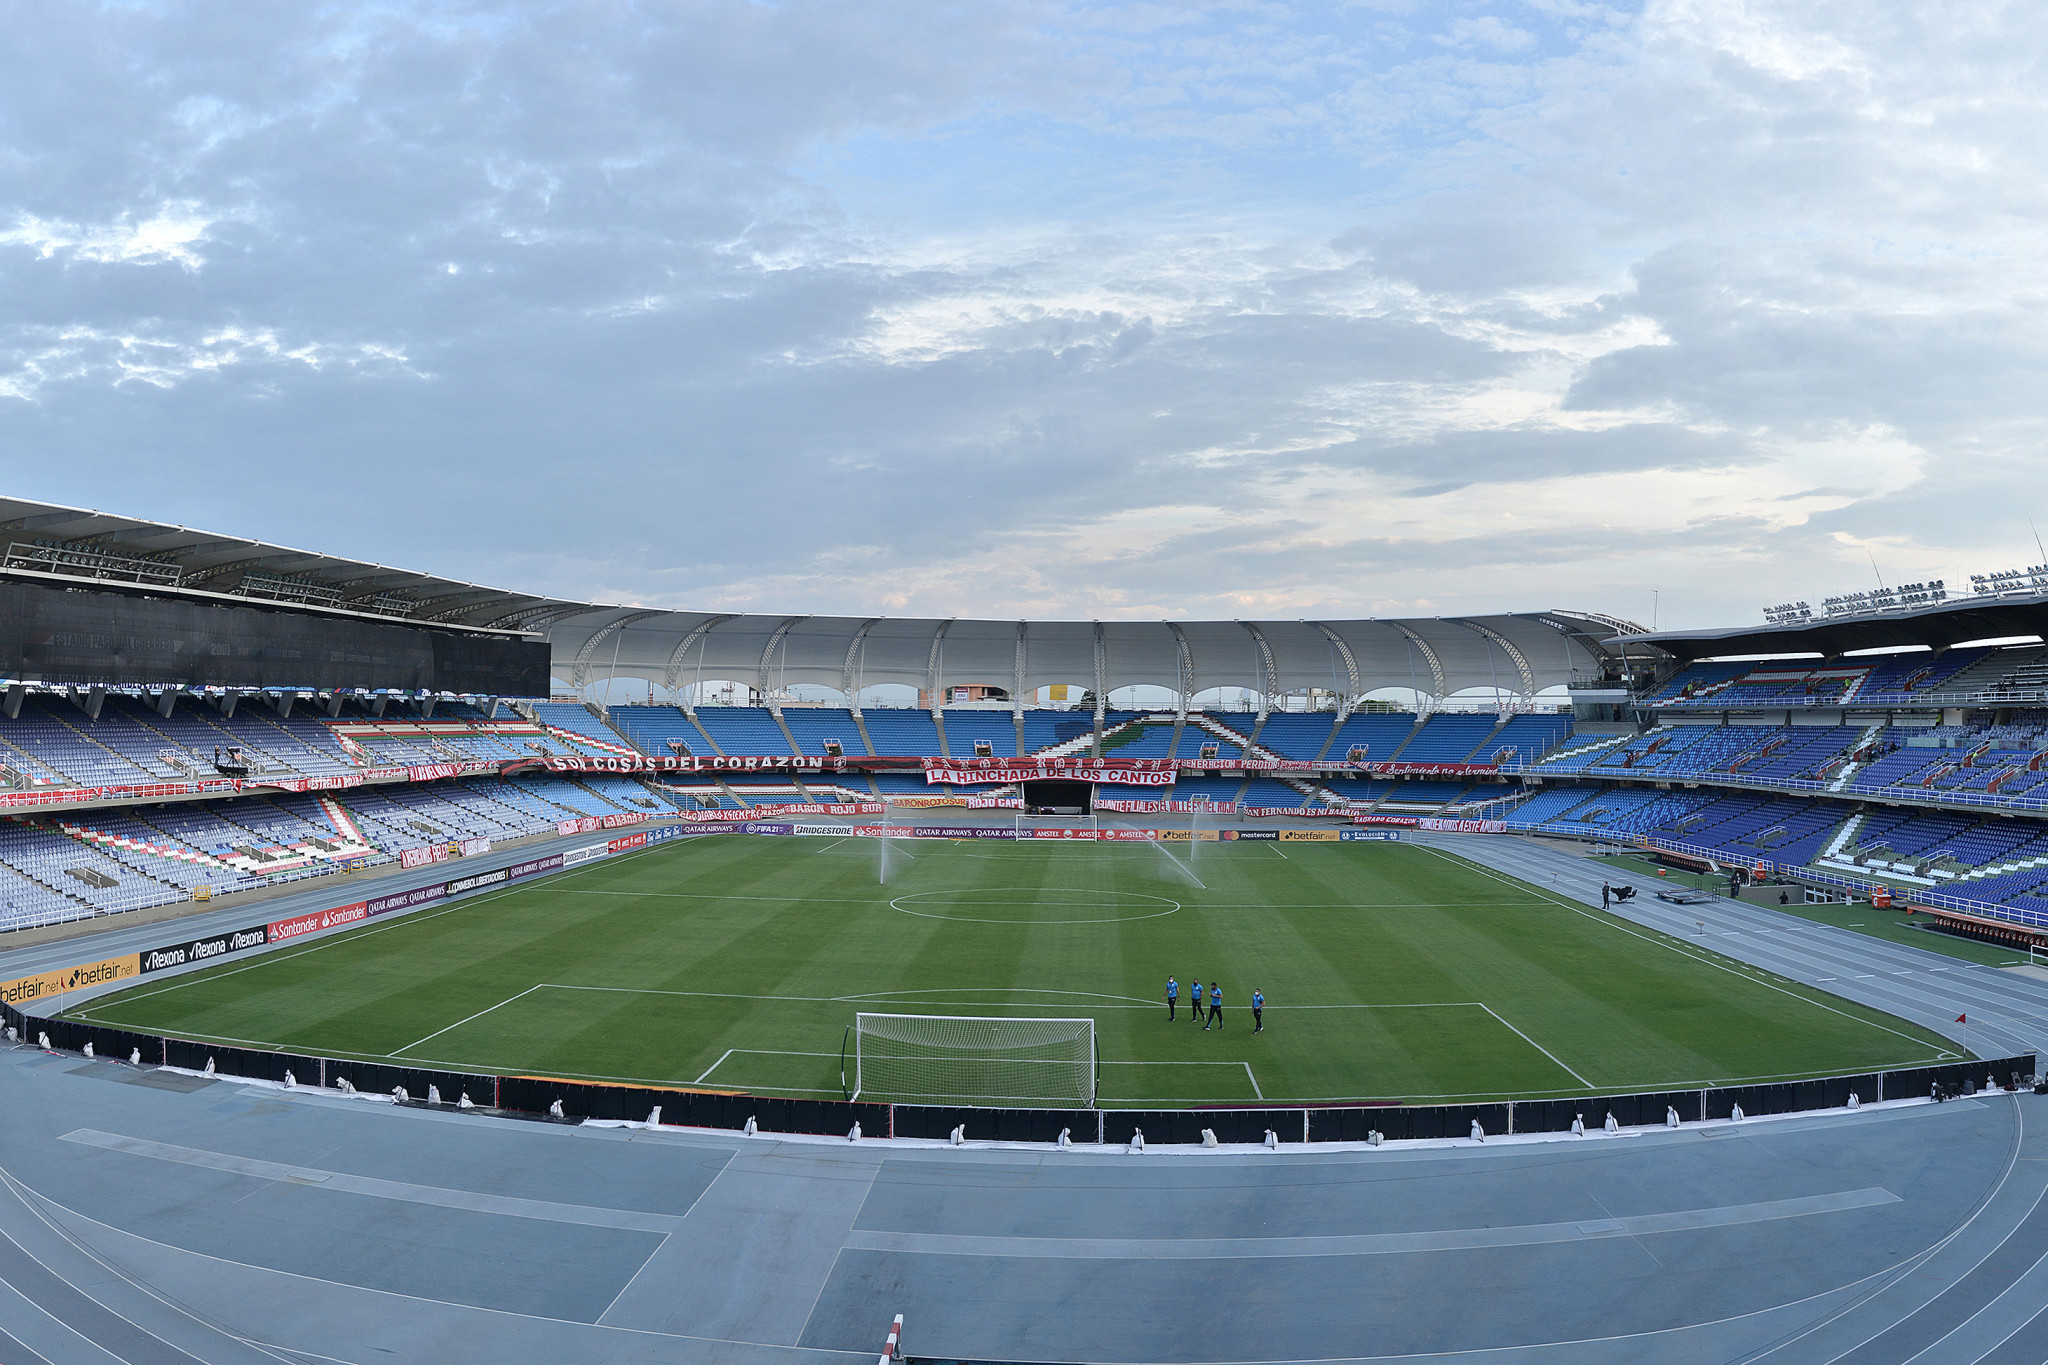 The Estadio Pascual Guerrero is set to act as the main venue for the Junior Pan American Games ©Getty Images